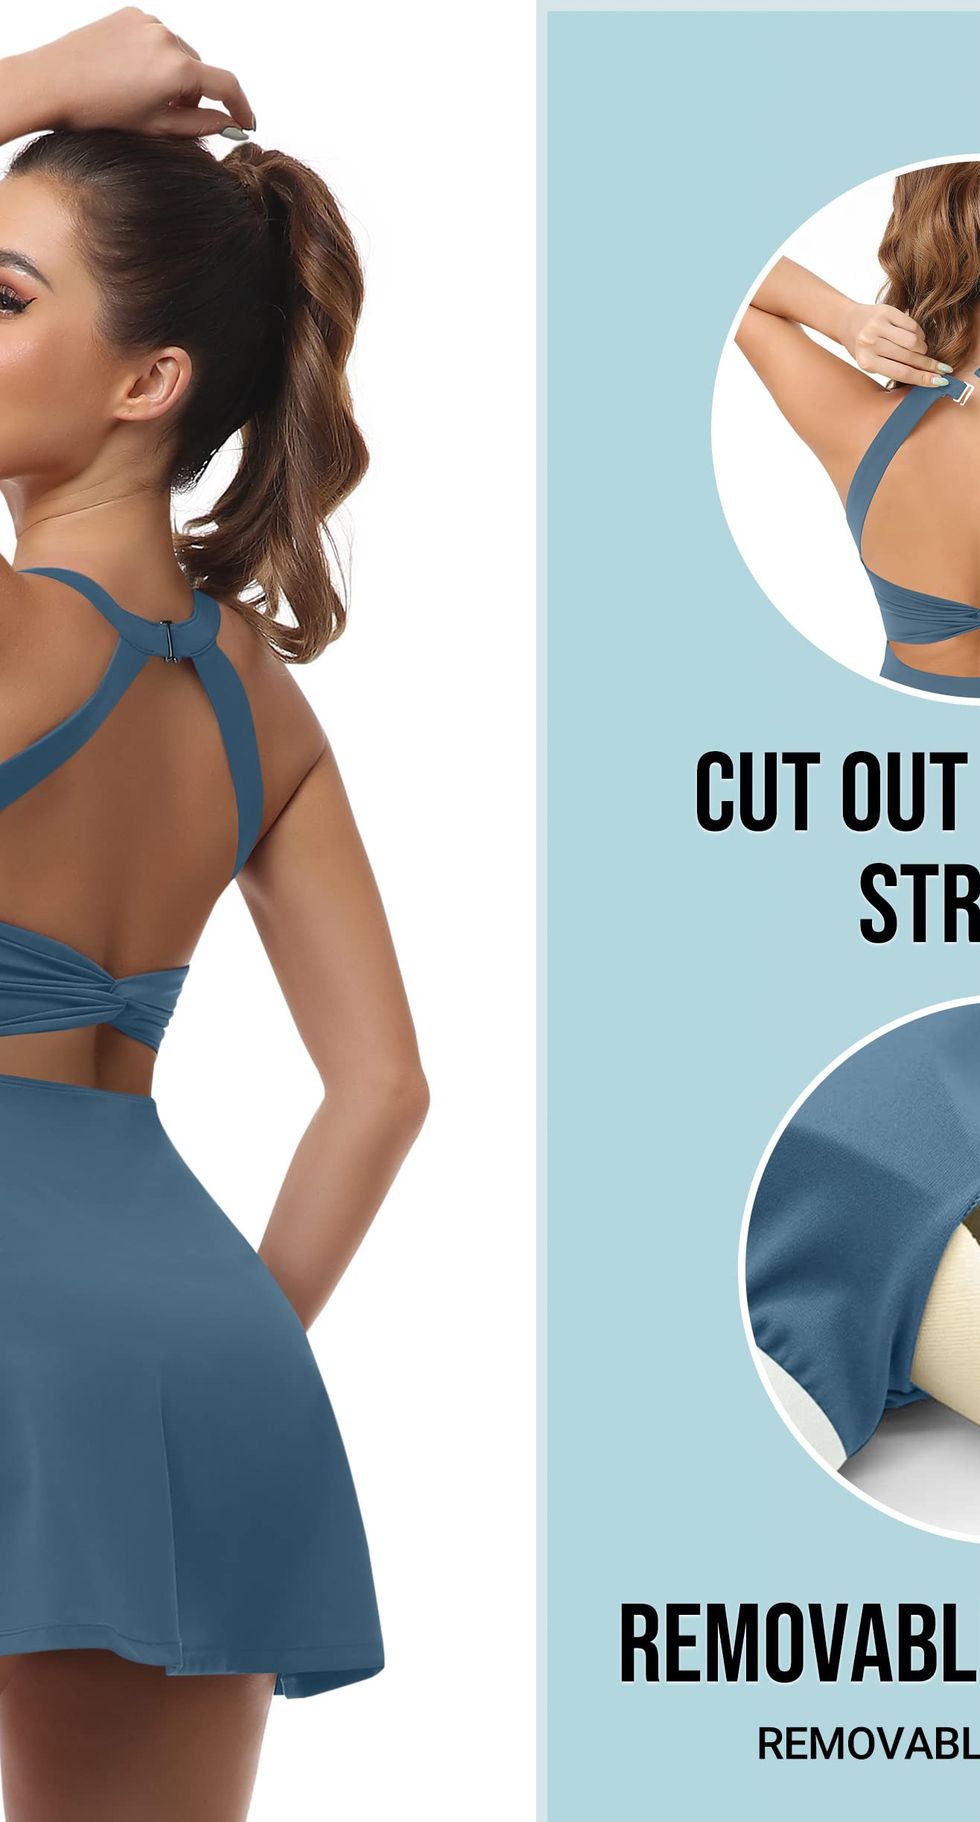 The Exercise Dress Edit